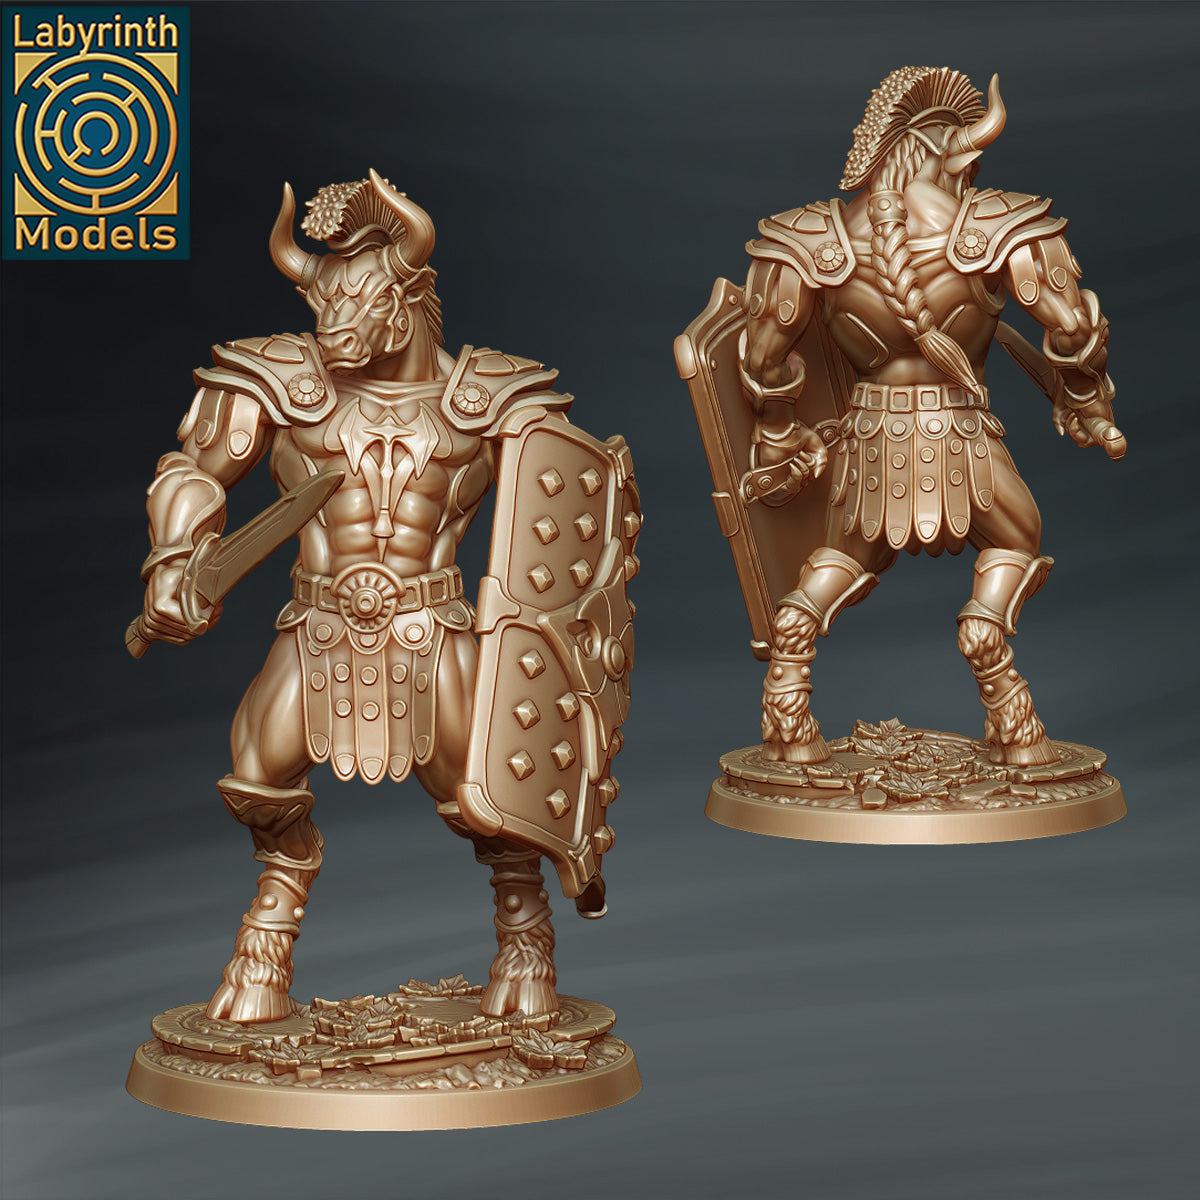 Minotaurs by Labyrinth Models